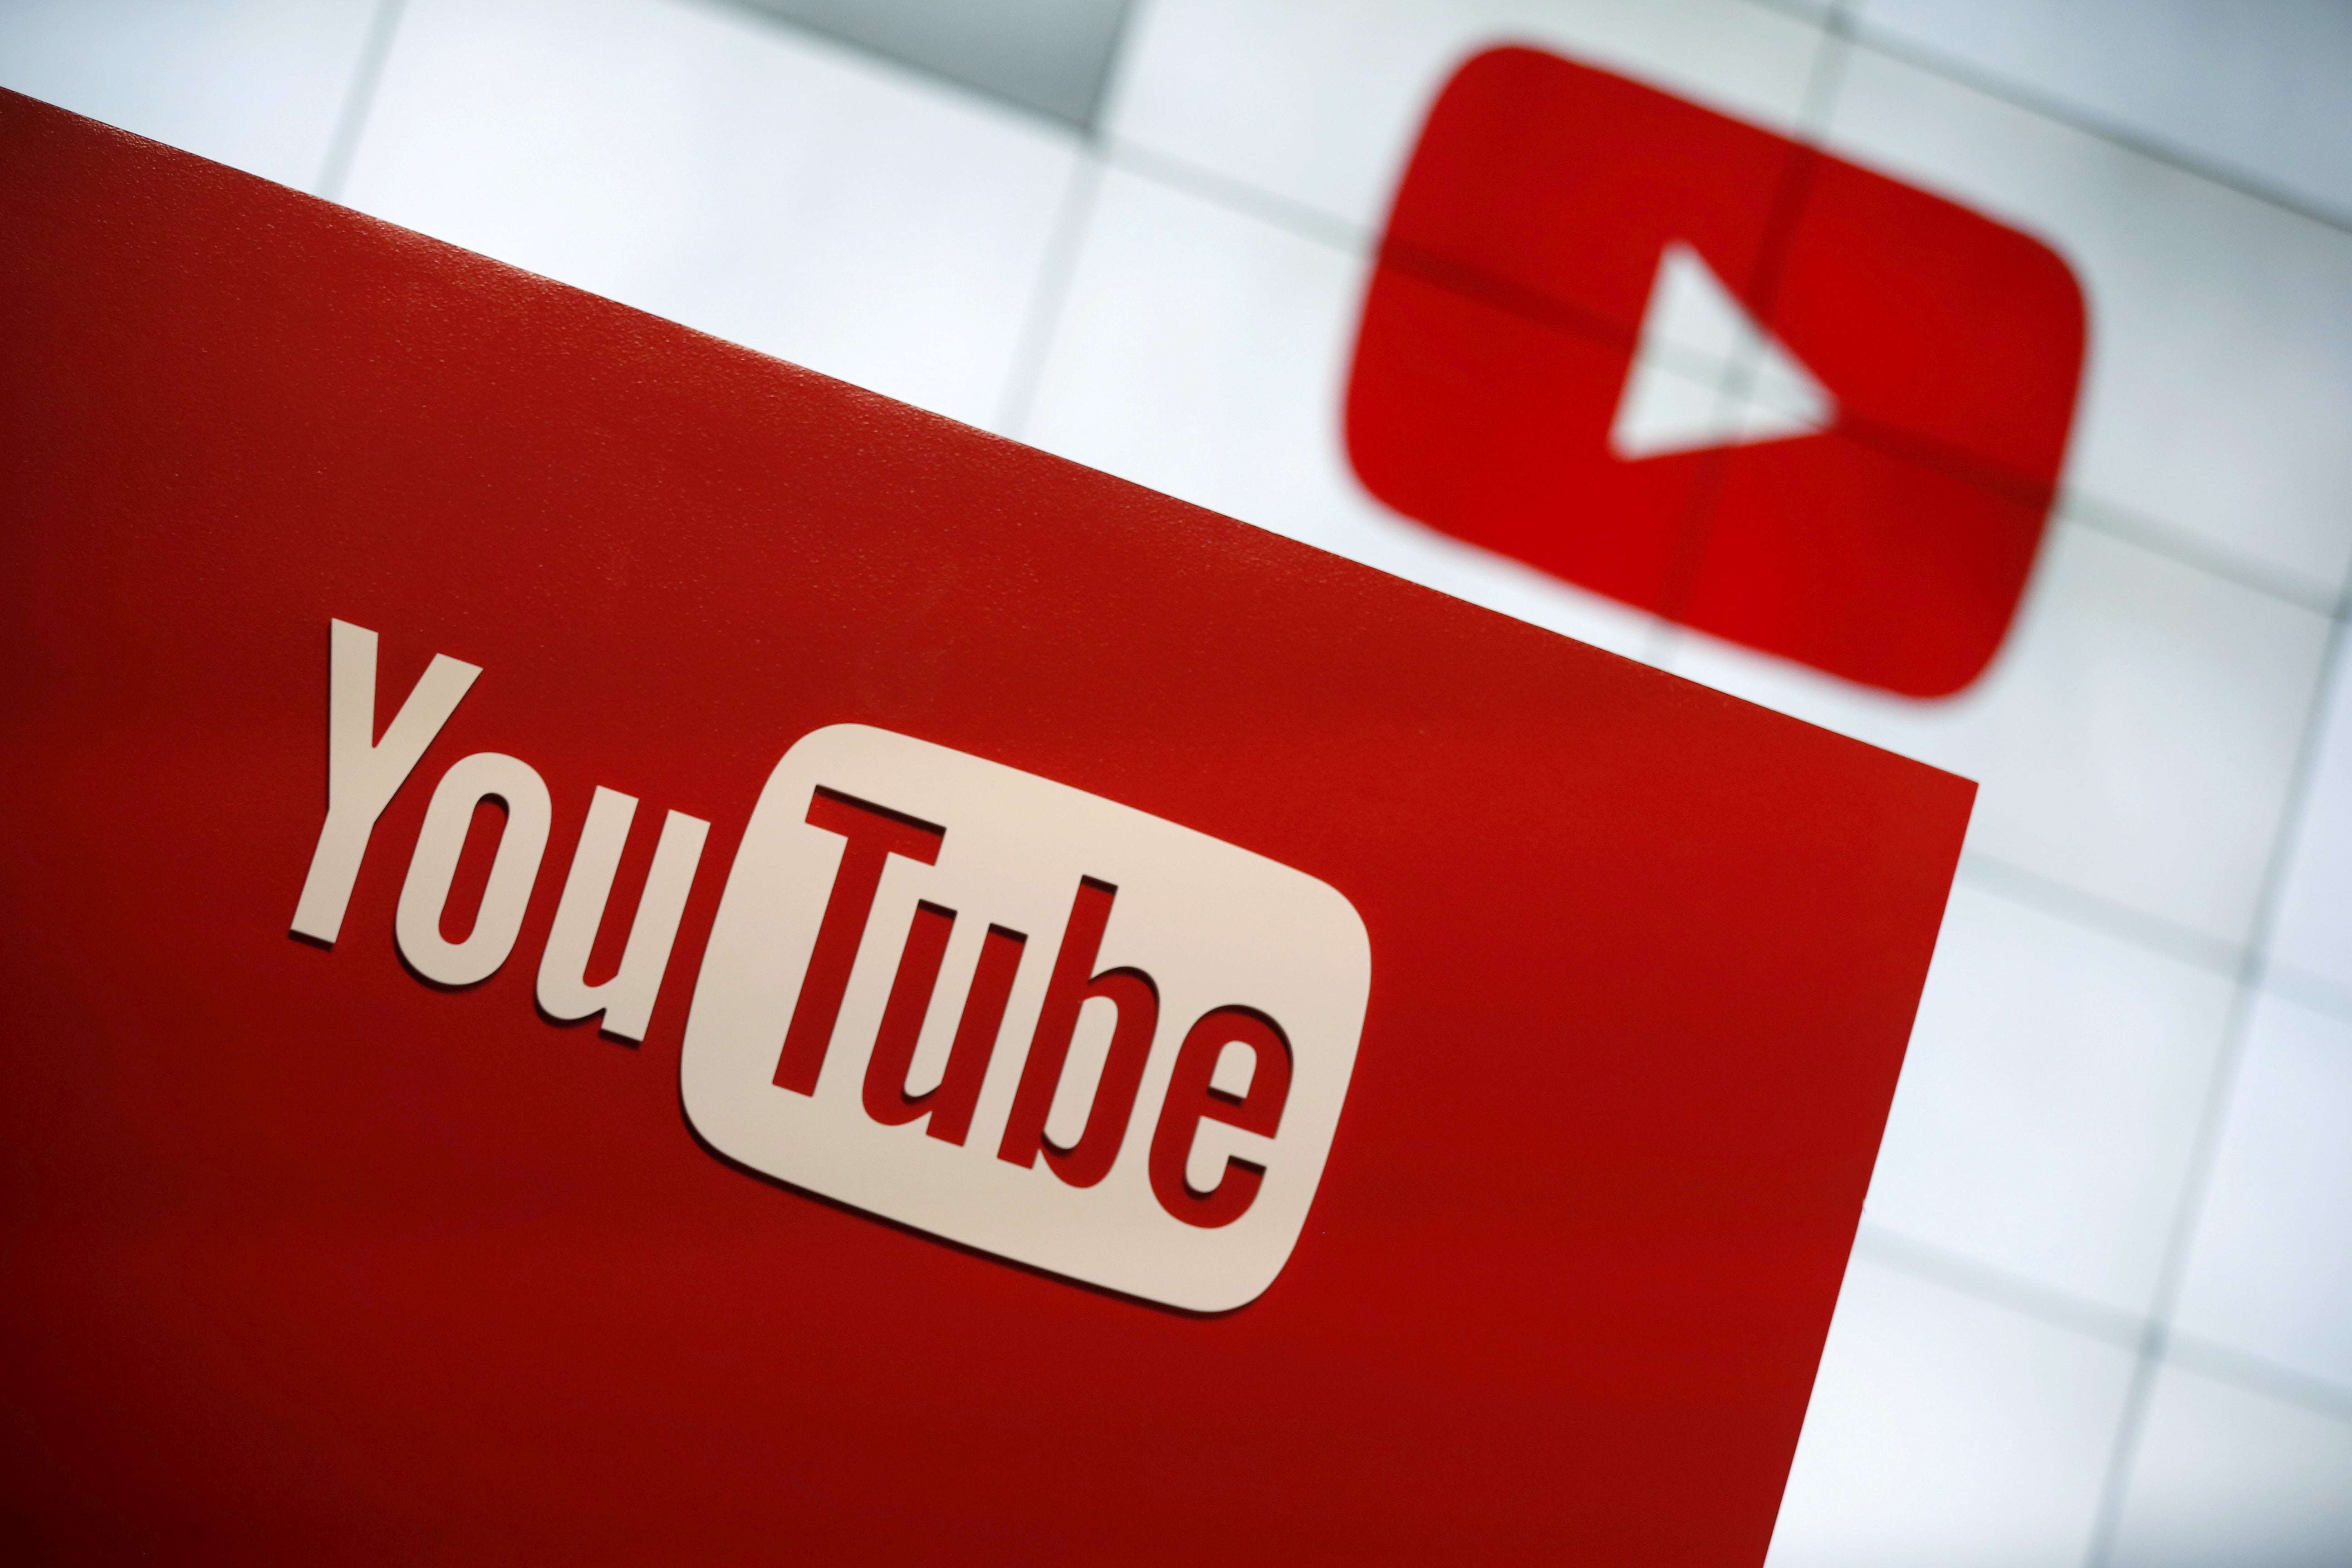 YouTube said it will review its decision &nbsp;within a week